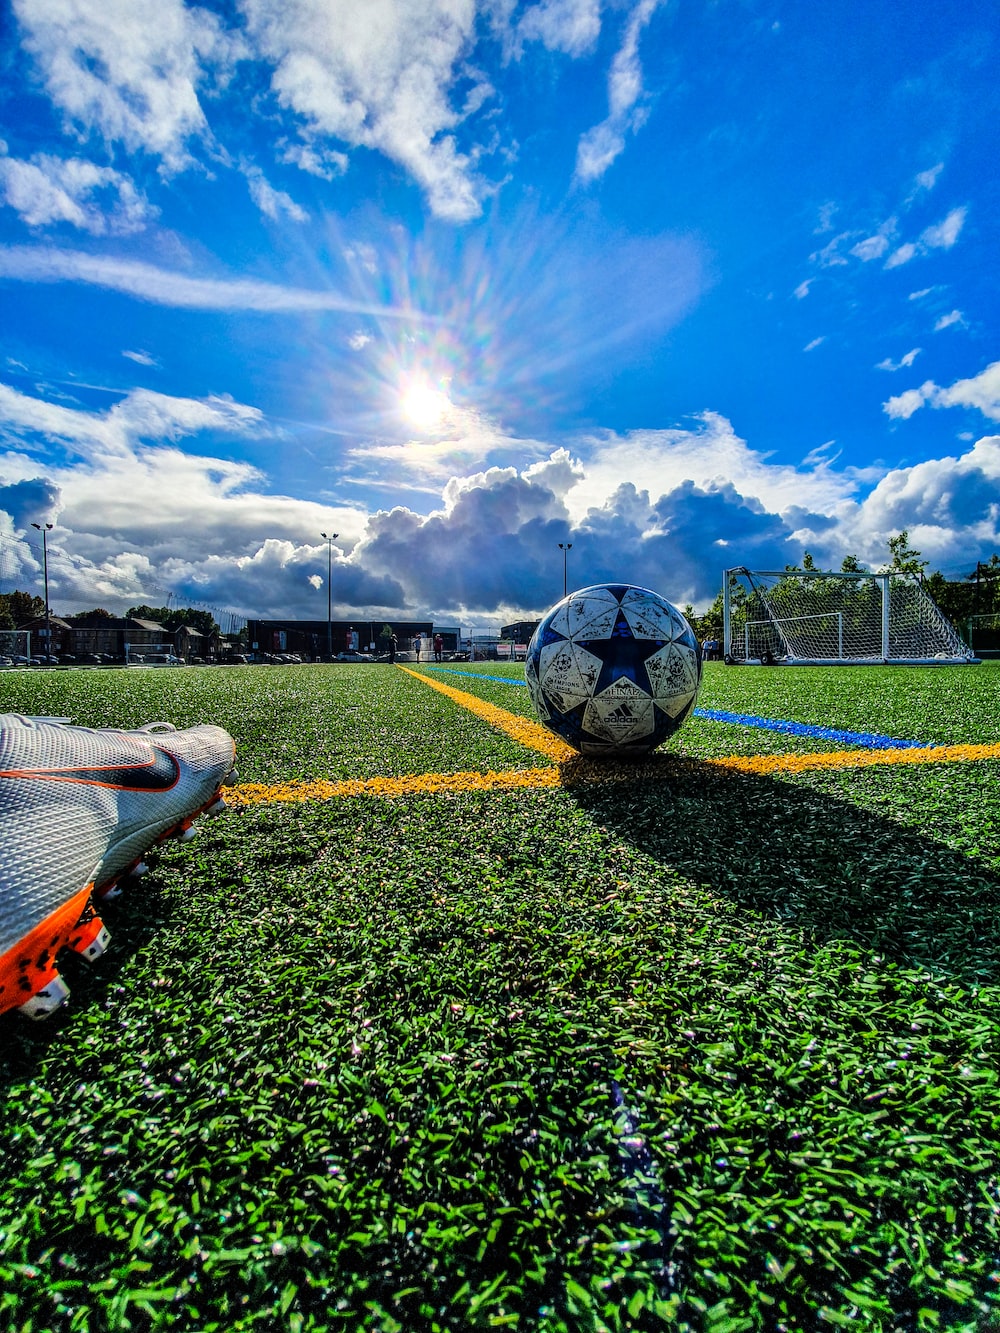 550 Soccer Field Pictures Download Free Images on